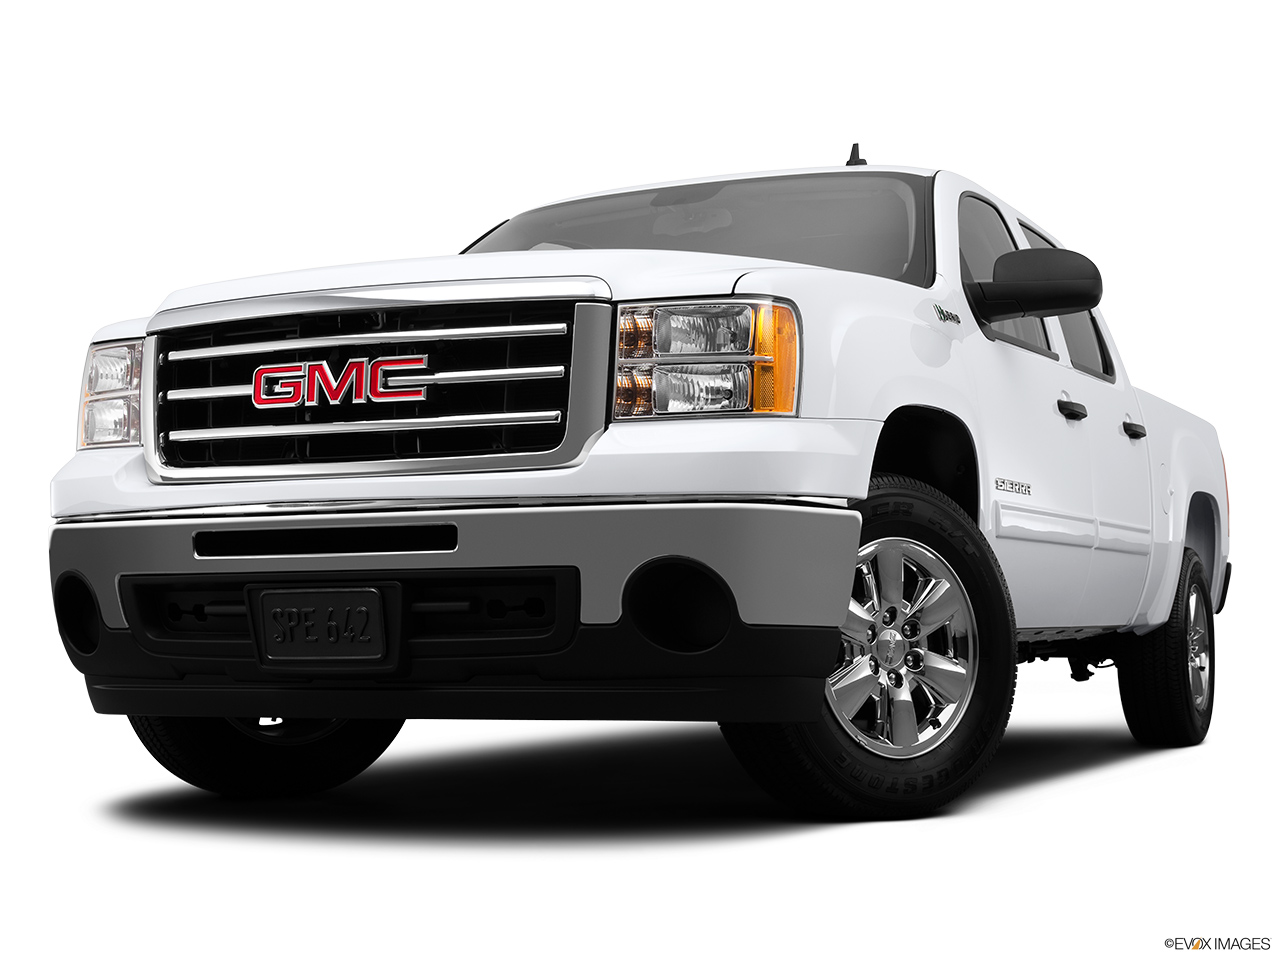 2013 GMC Sierra 1500 Hybrid 3HA Front angle view, low wide perspective. 